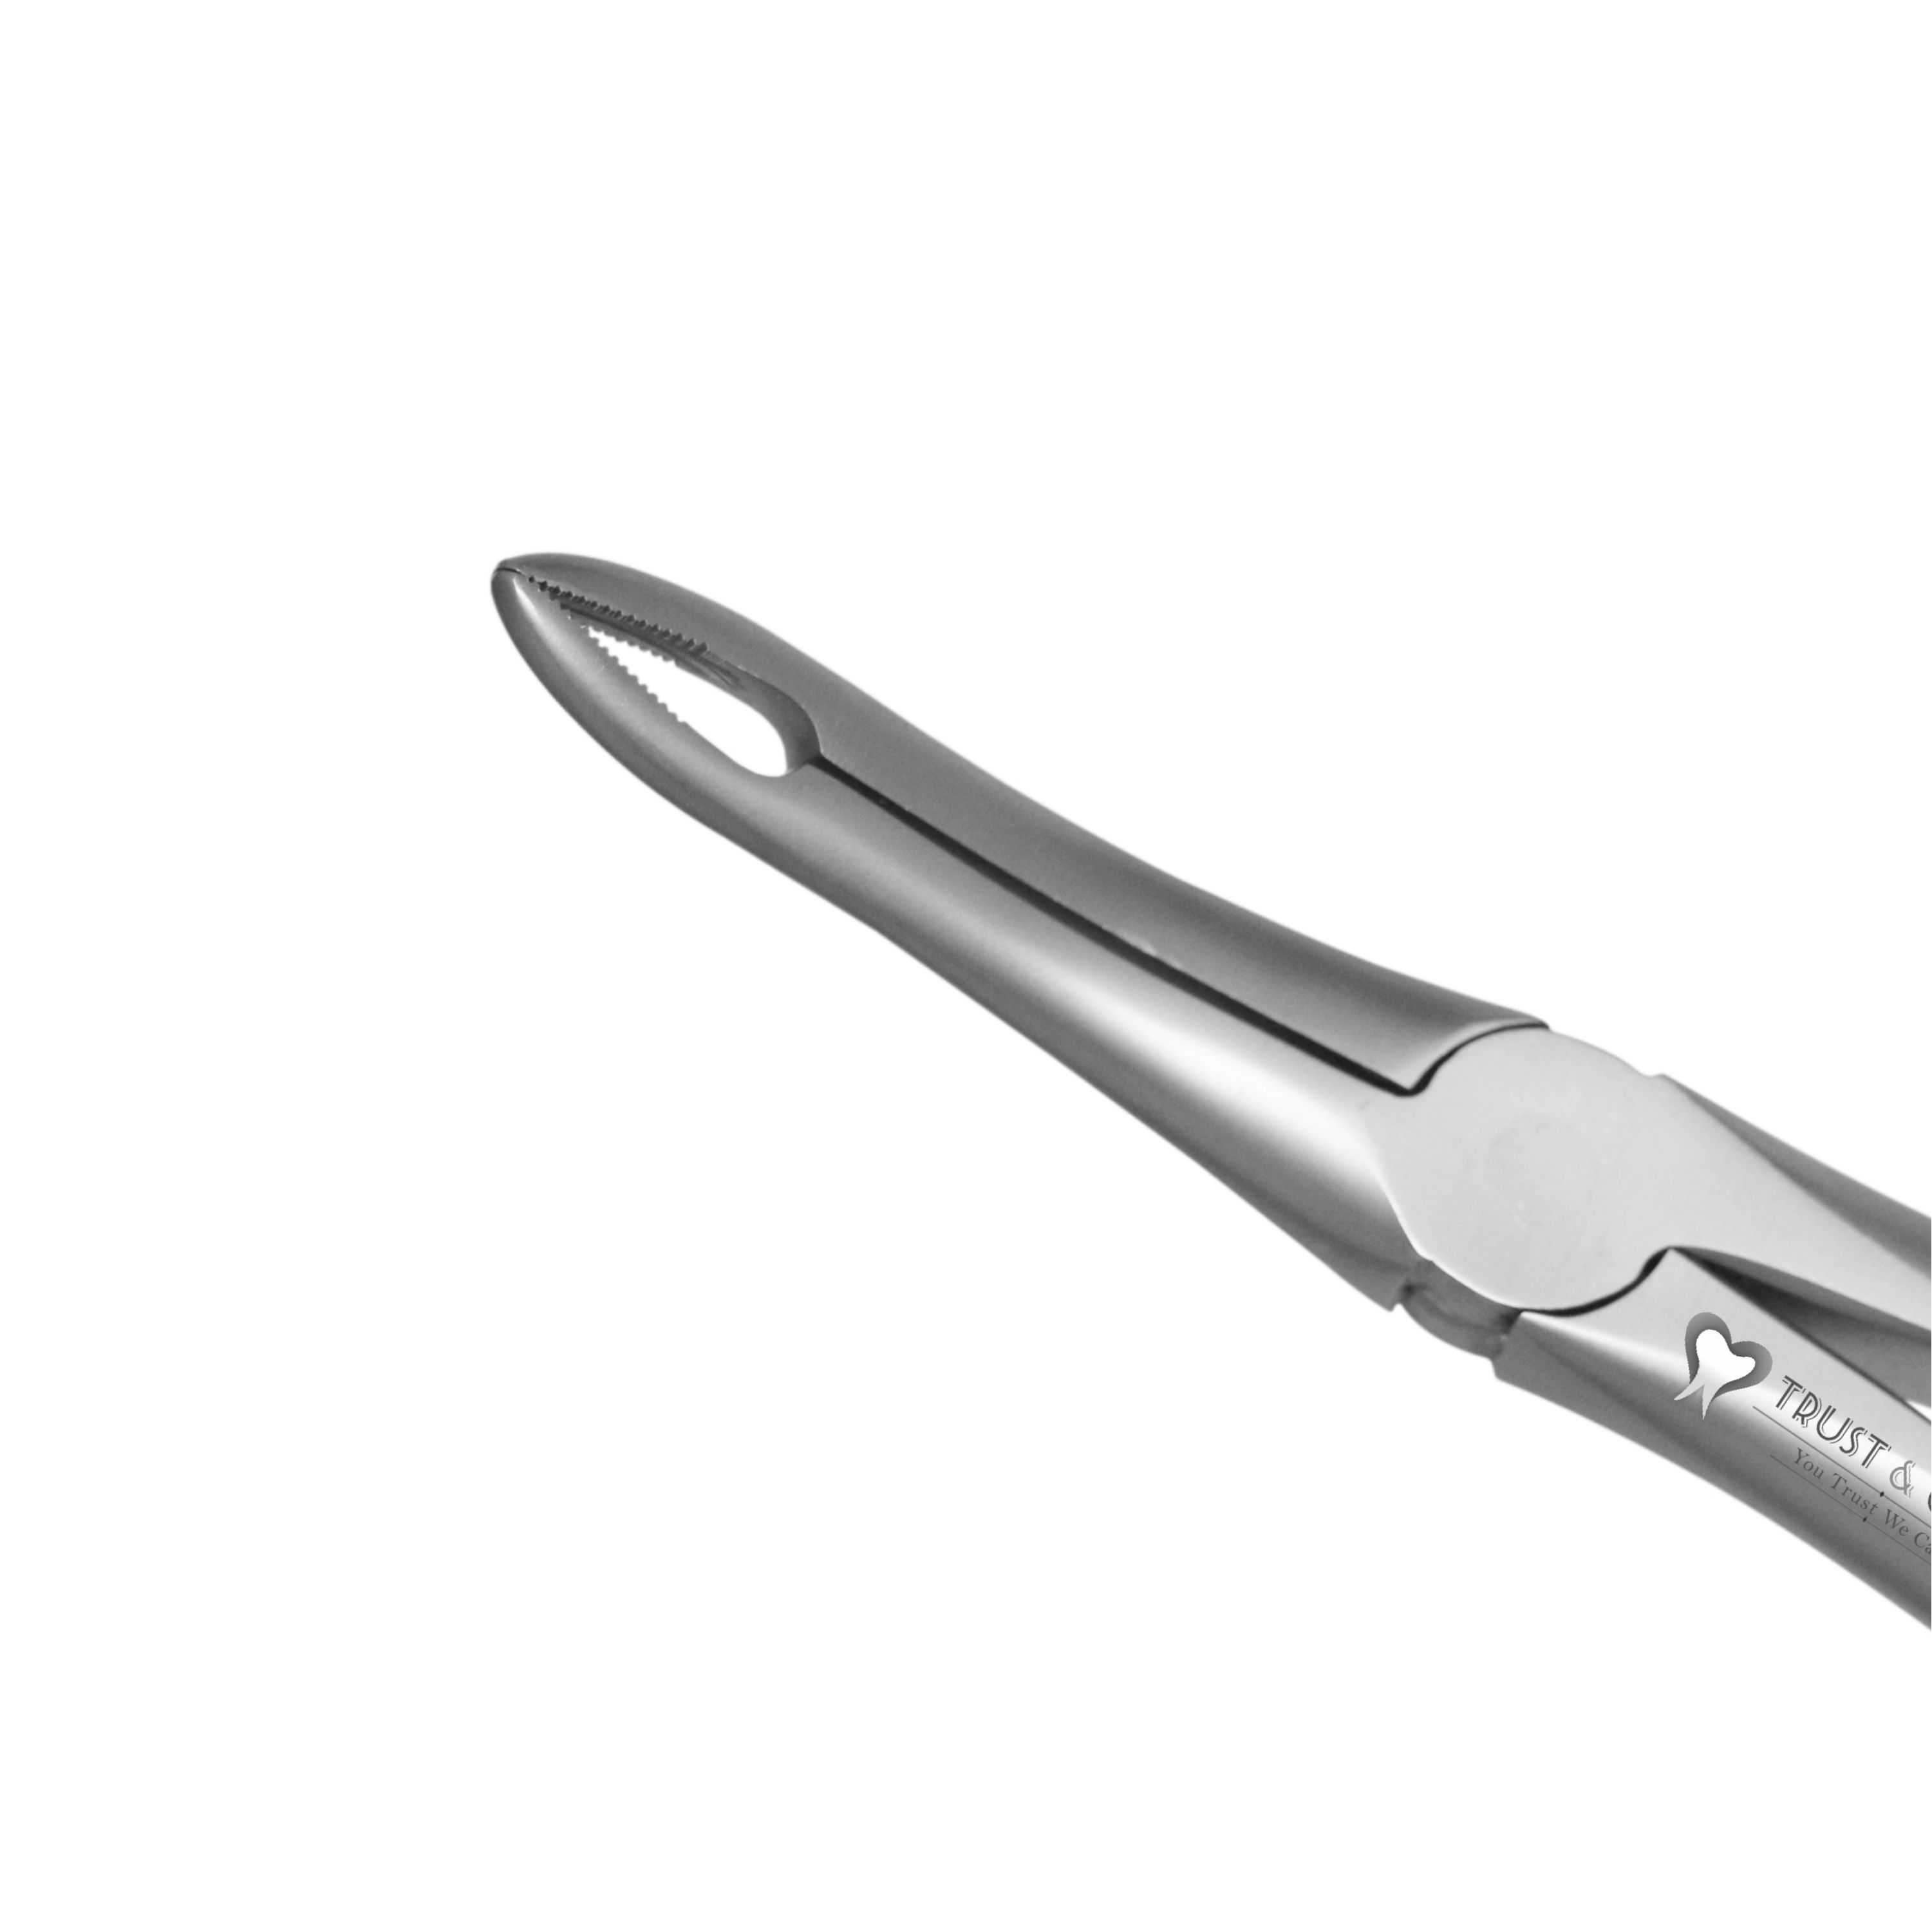 Trust & Care Secure Forcep Upper Roots Fig No. 849.00